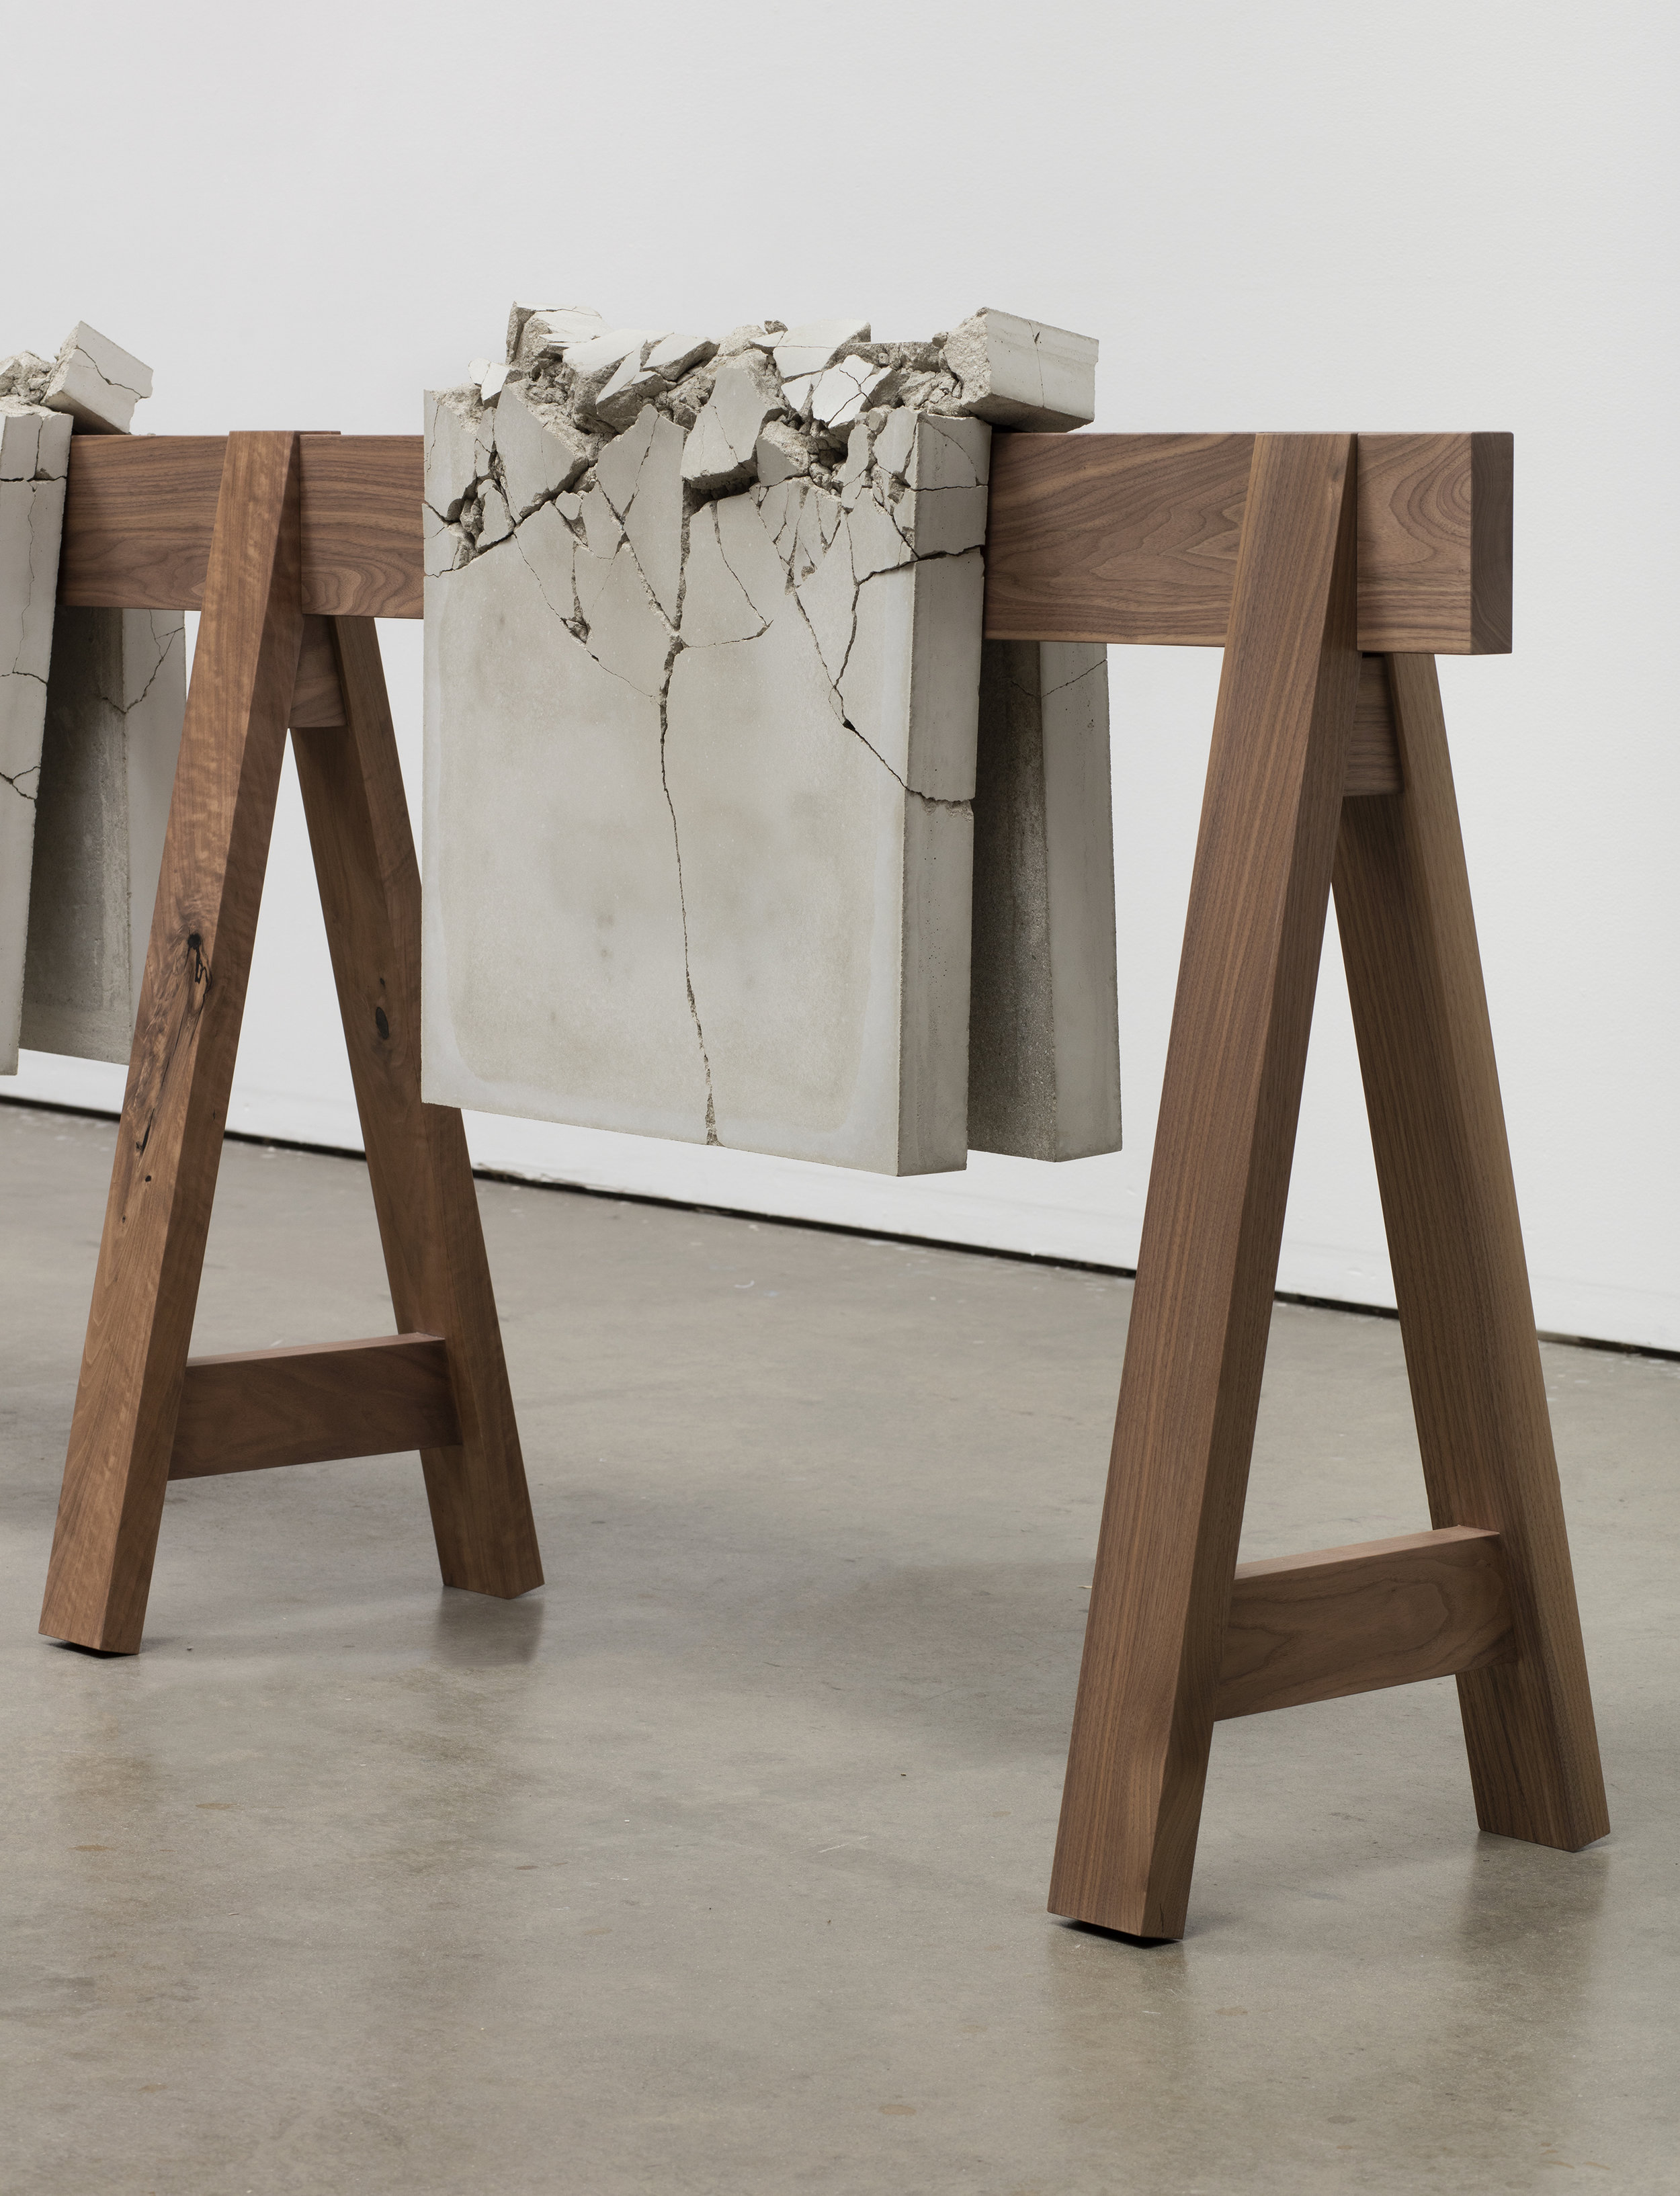 Analia Saban. “Draped Concrete” (2016). Four concrete slabs on wooden sawhorse. 104,8 x 487,7 x 42,9 41 CENTIMETERS. 1/4 x 192 x 16 7/8 INCHES Courtesy the artist and Sprüth Magers Photo: Brian Forrest